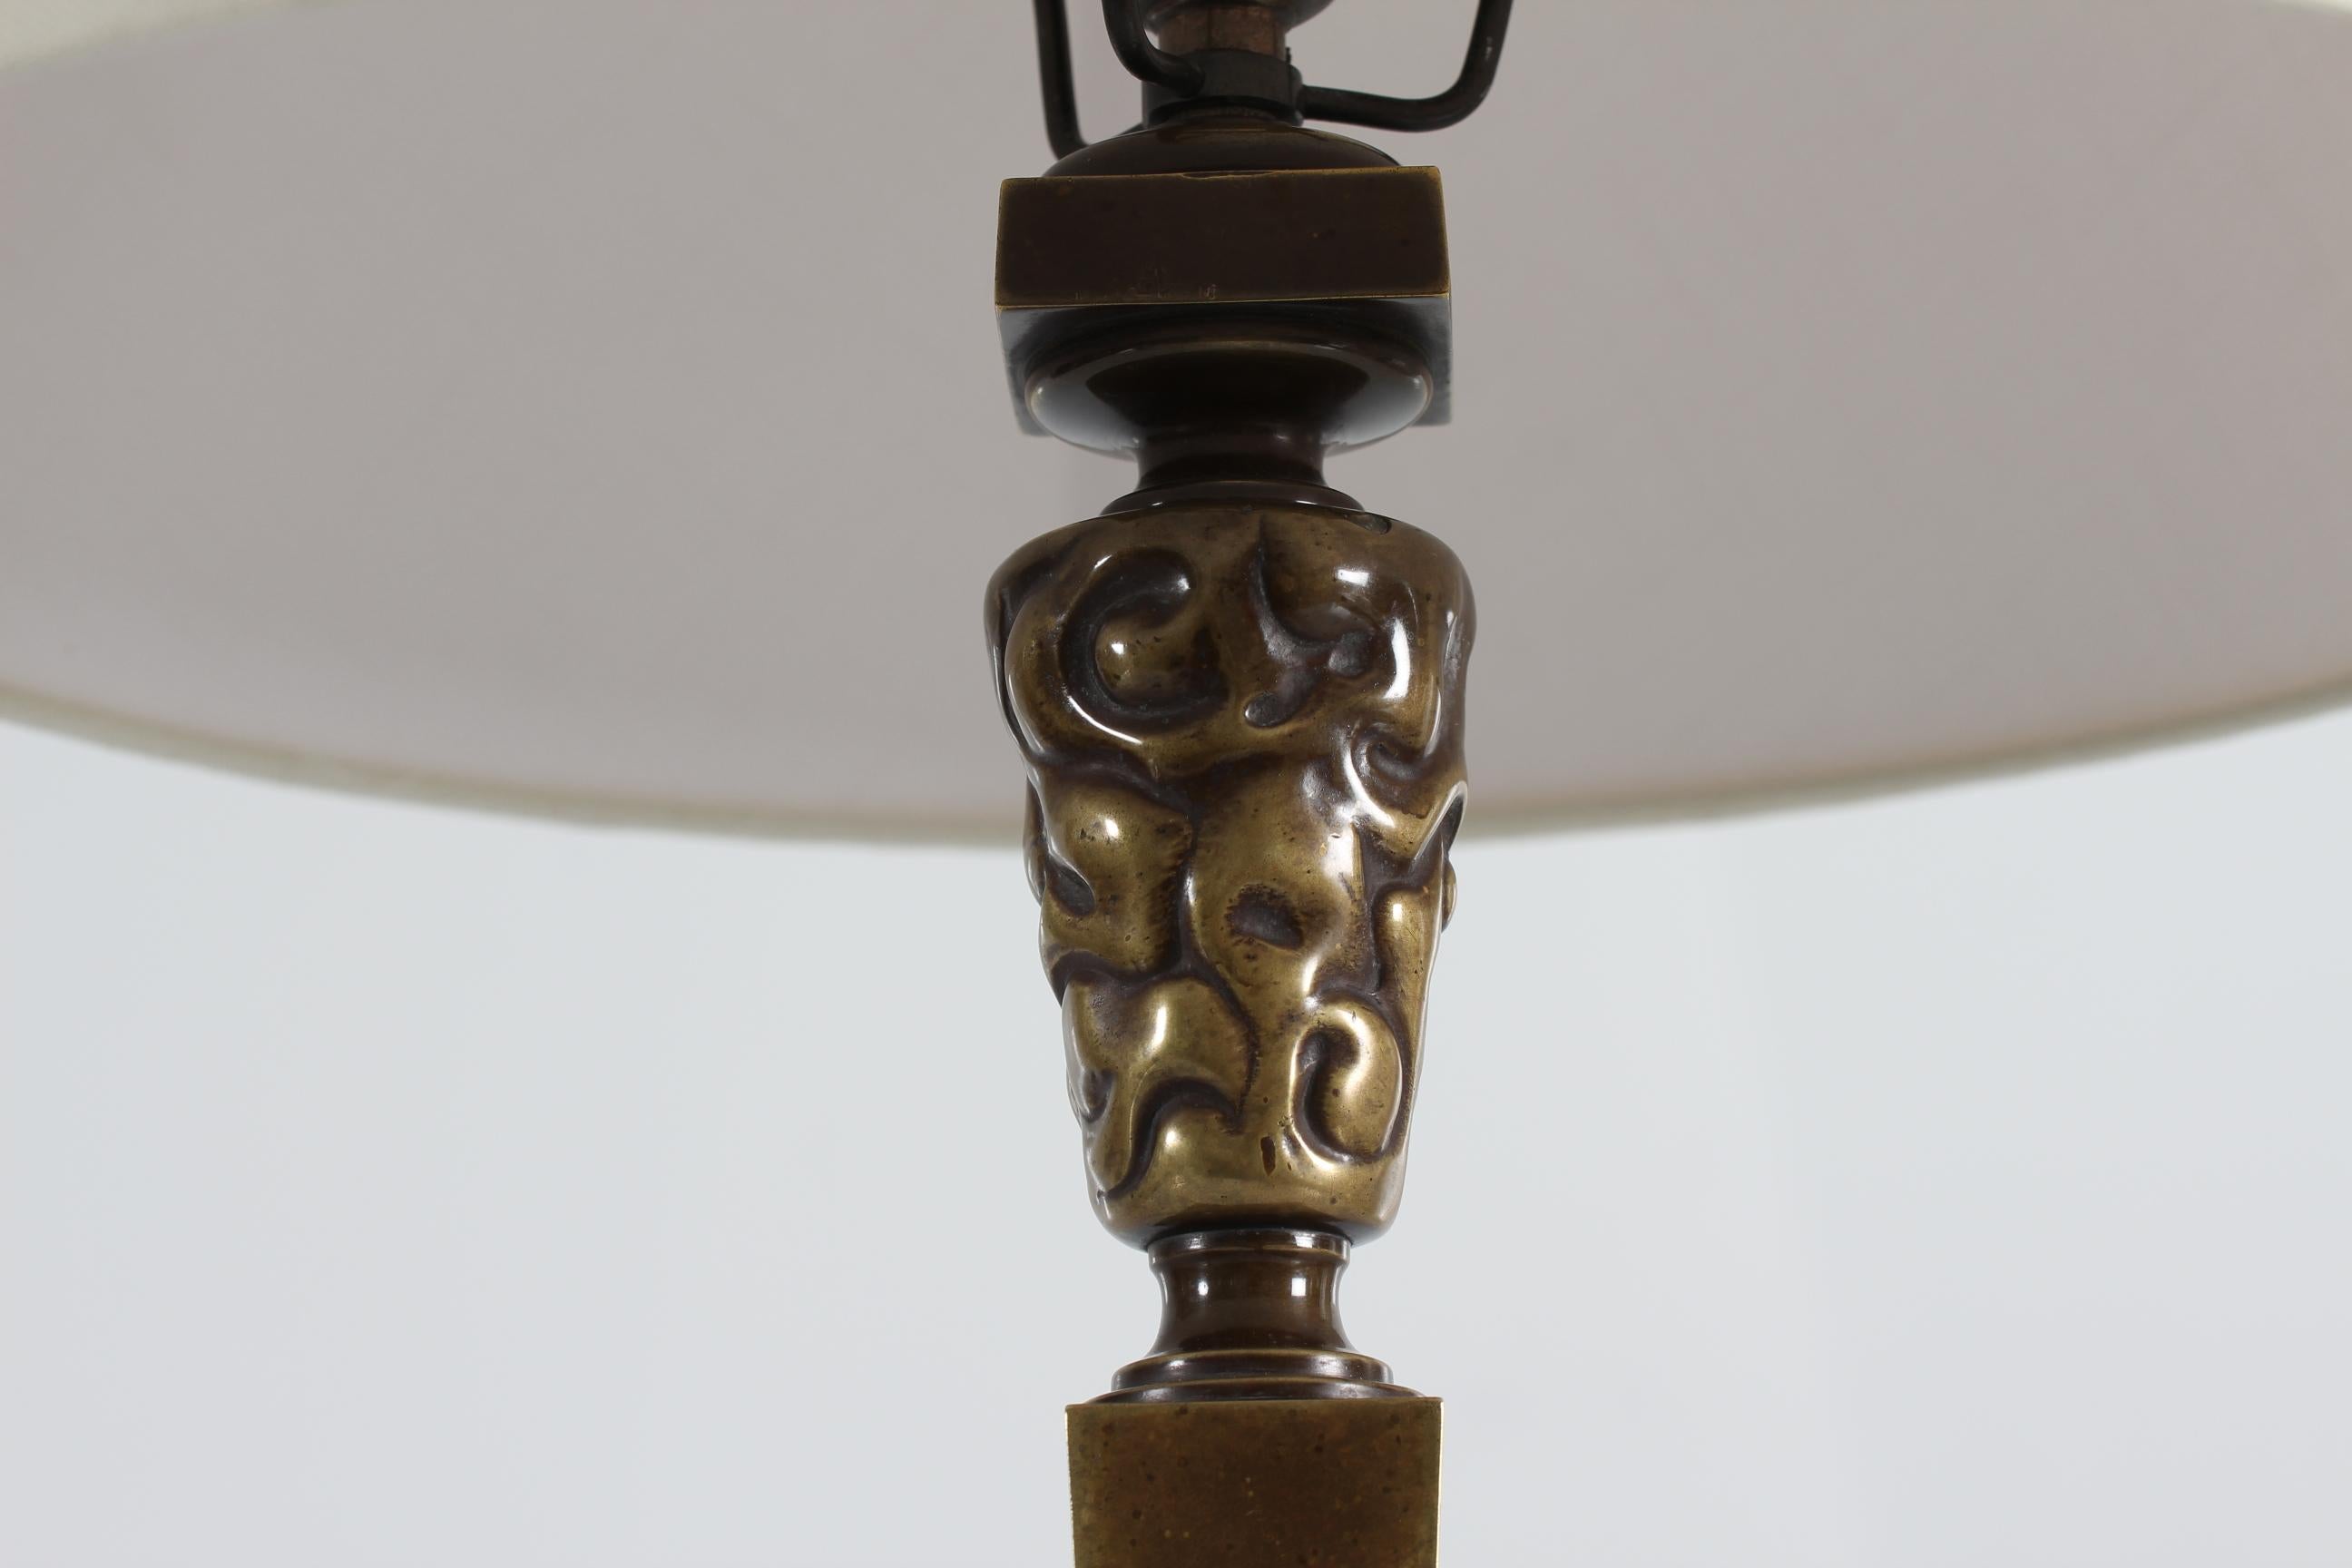 Danish Thorvald Bindesbøll High Art Nouveau Table Lamp 1890s Patinated Bronze For Sale 1